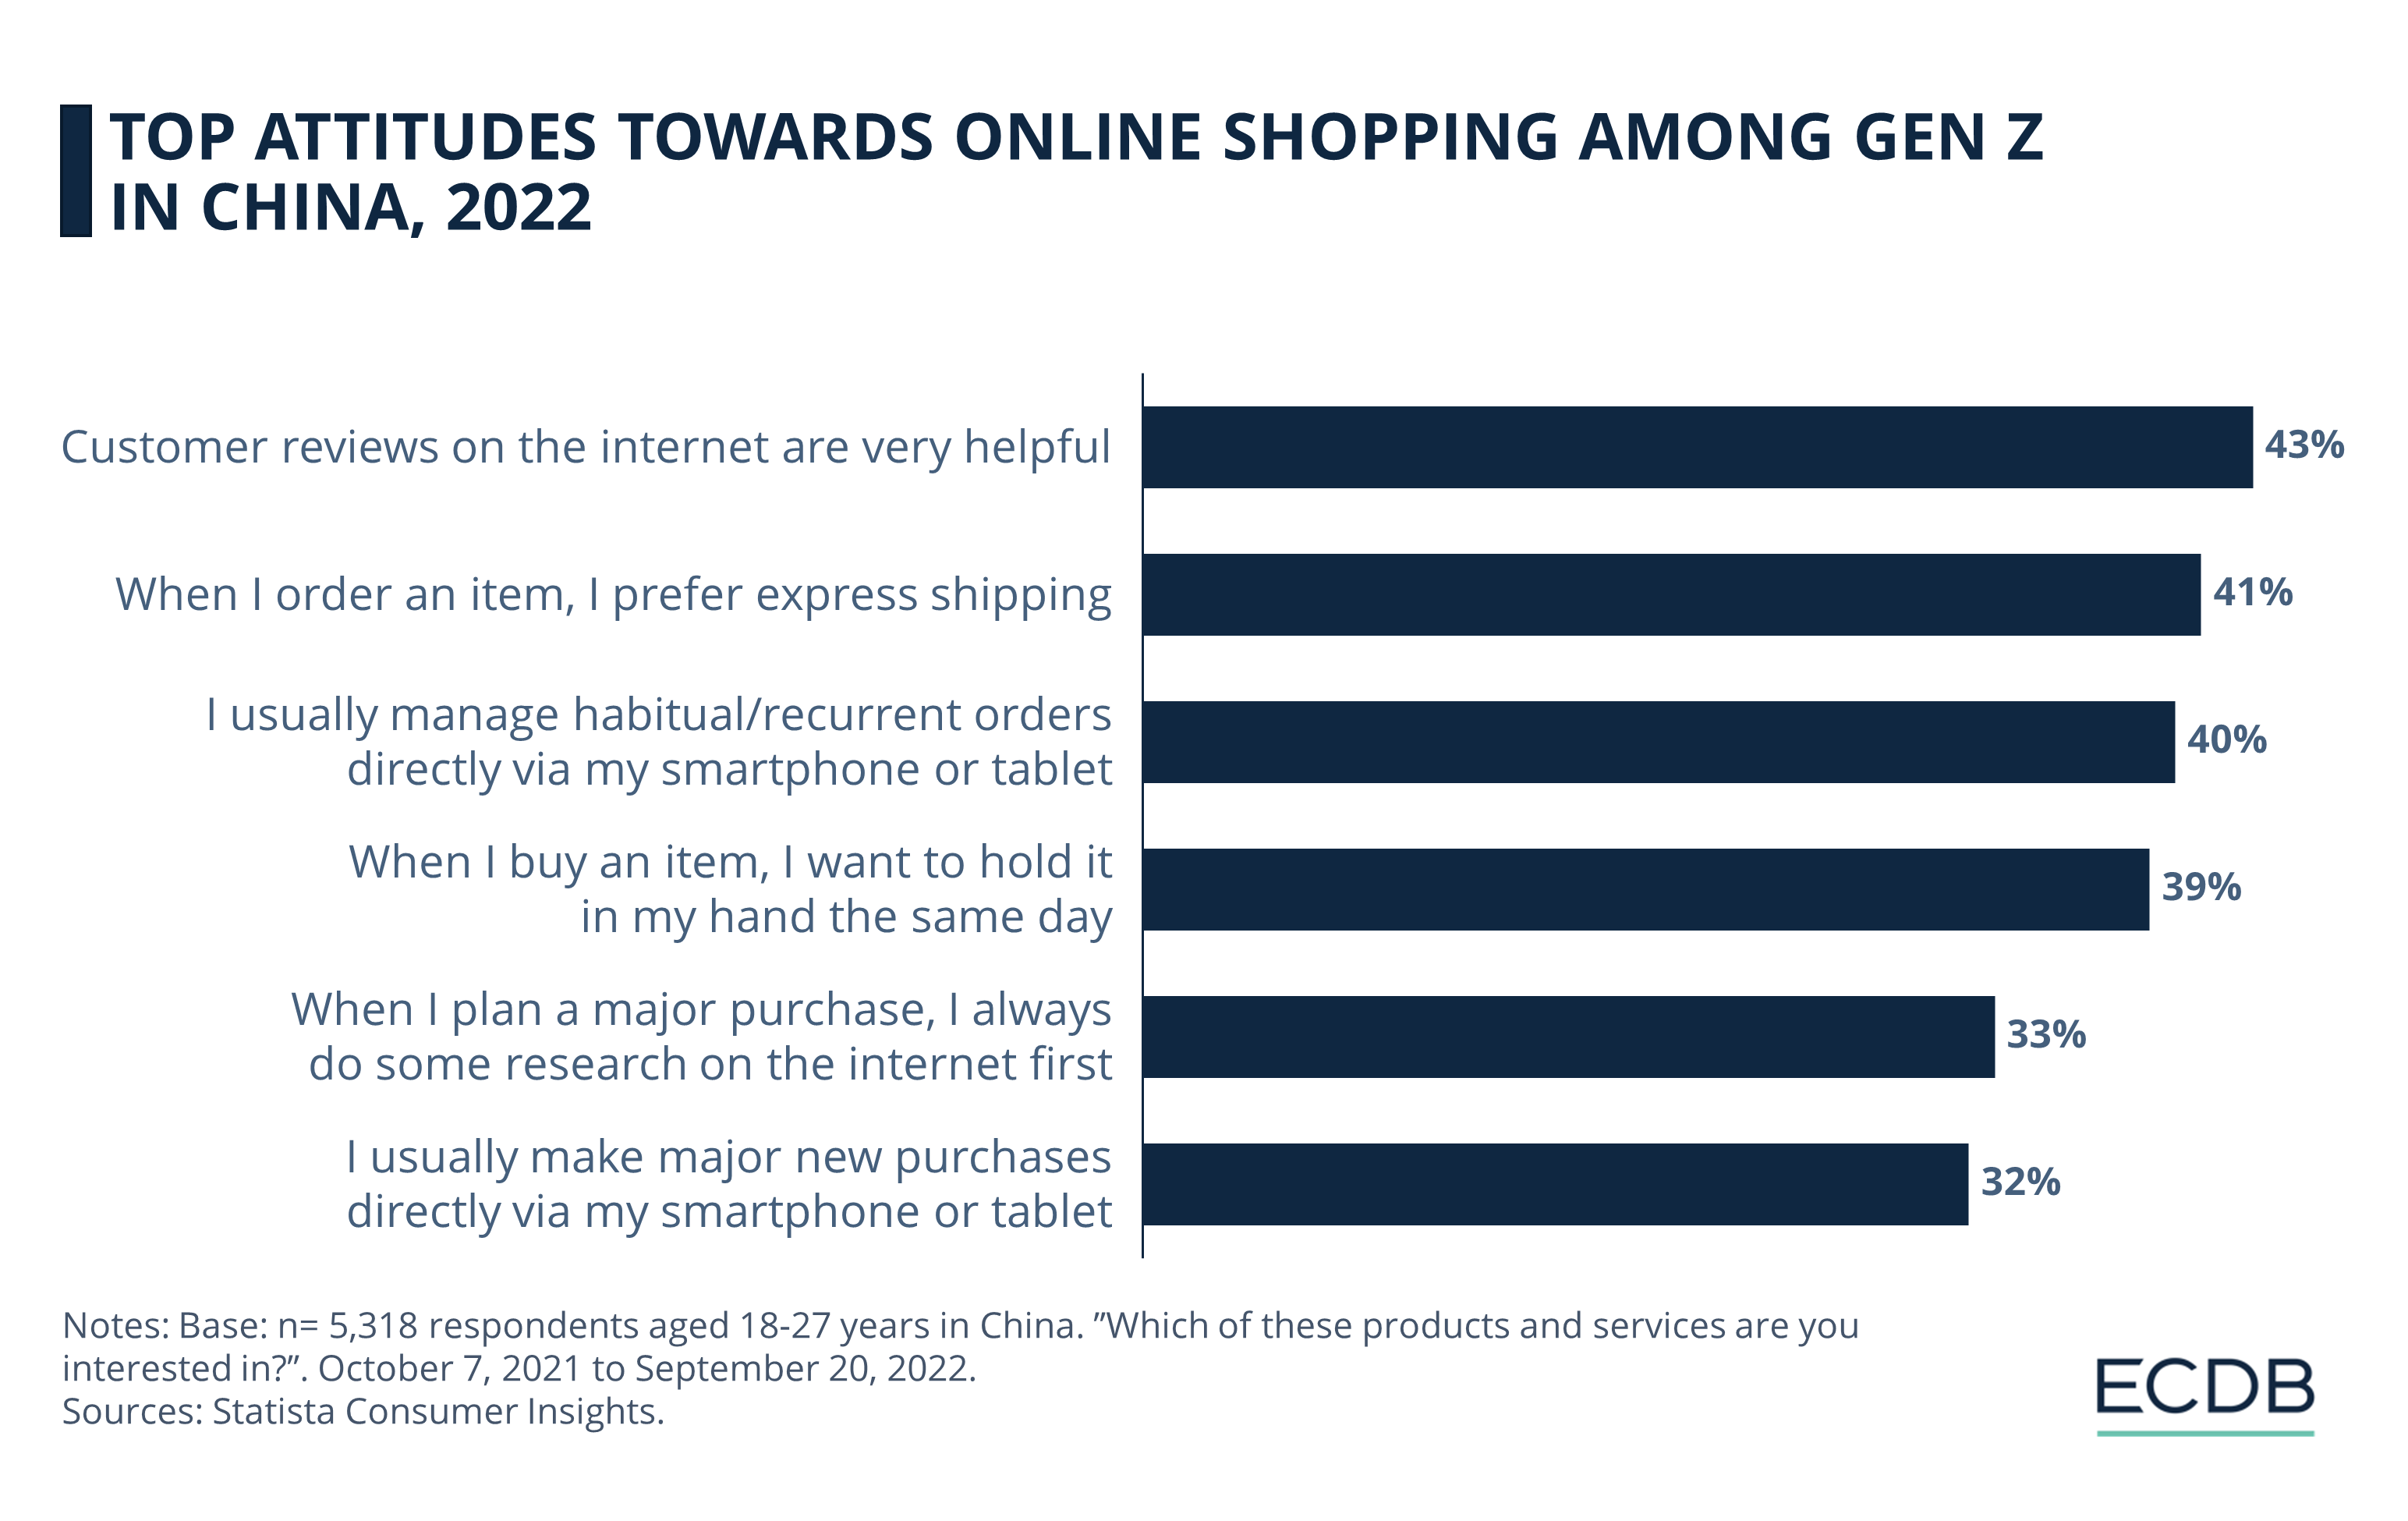 Top Attitudes Towards Online Shopping Among Gen Z in China, 2022